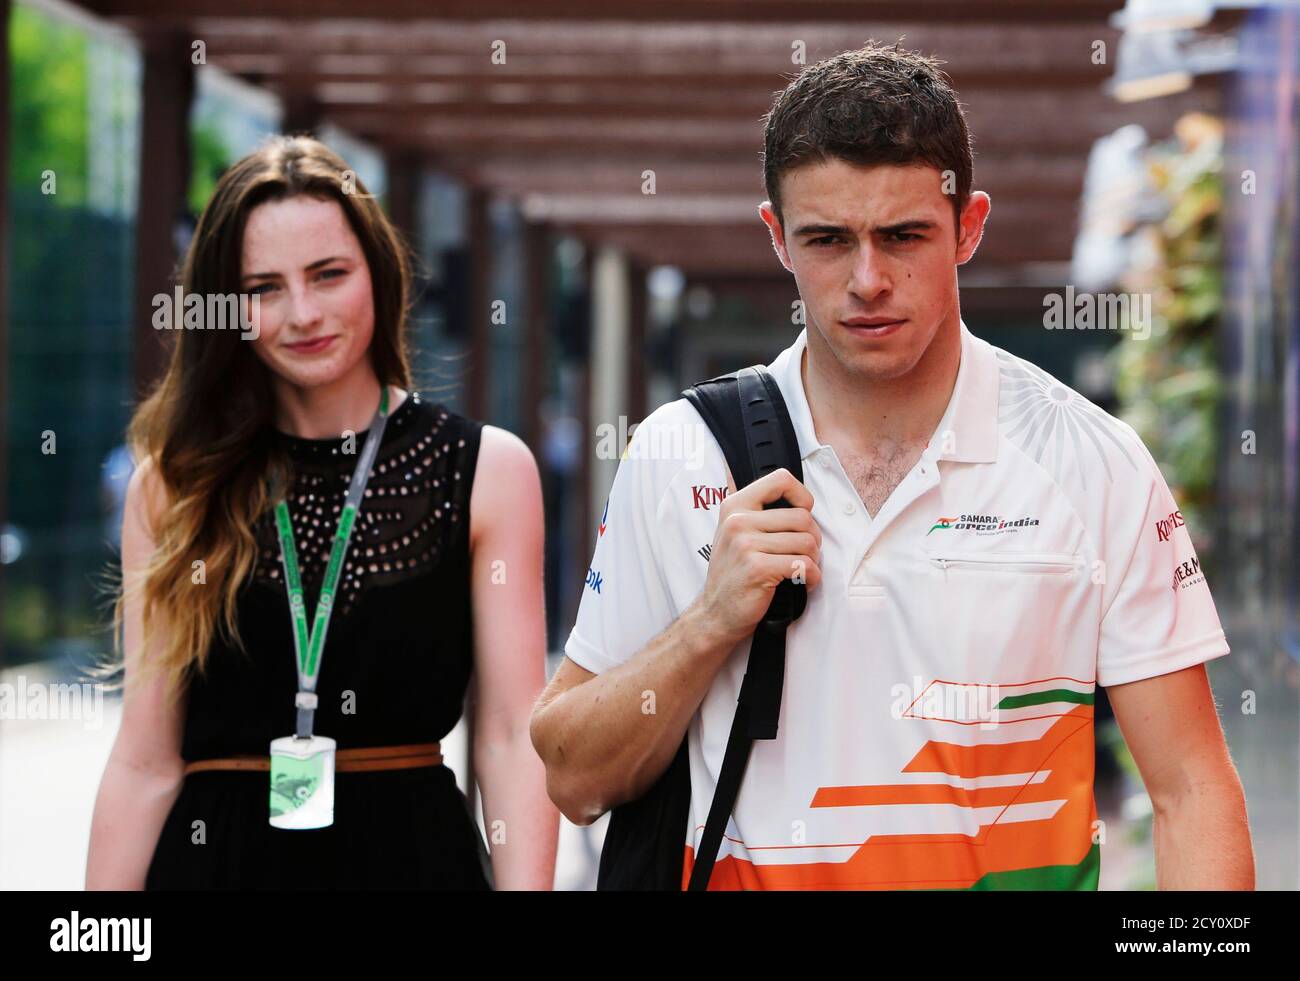 Force India Formula One driver Paul di Resta of Britain (R) arrives with  his girlfriend Laura Jordan before the third practice session of the  Singapore F1 Grand Prix at the Marina Bay